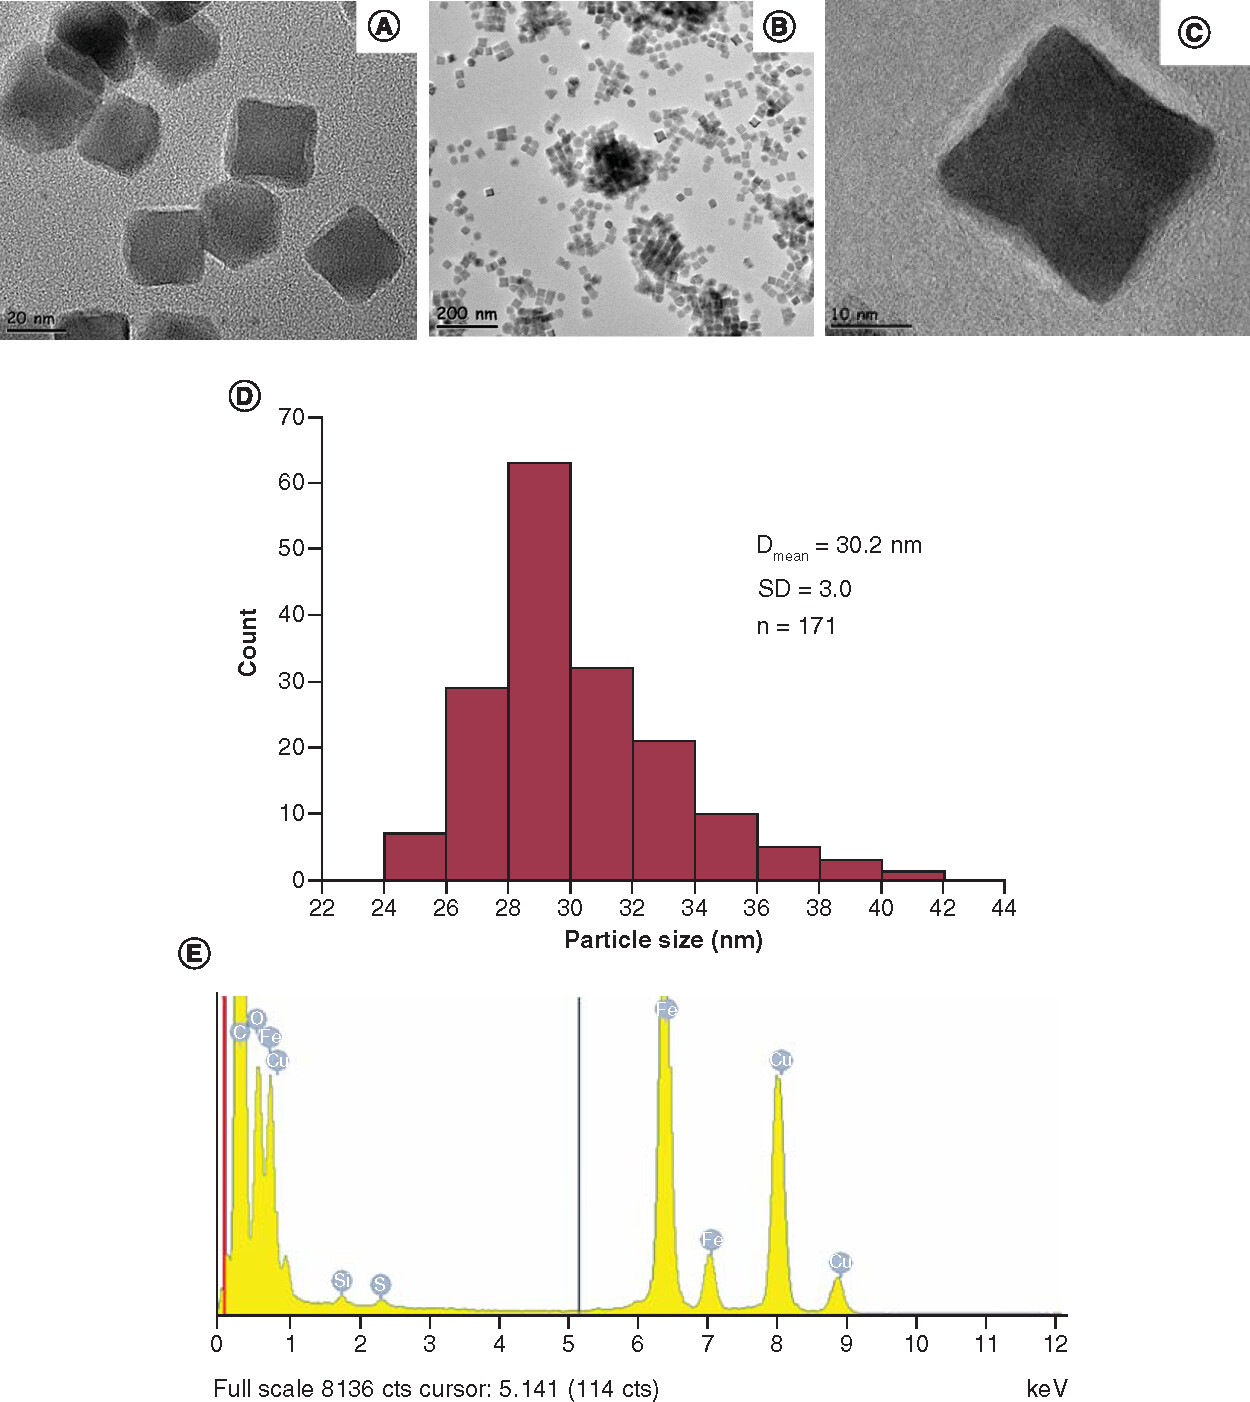 Figure 2. Transmission electron microscope images (A–C) at different magnifications, corresponding particle size distribution (D) and transmission electron microscope energy dispersive X-ray spectrum (E) of the iron oxide nanoparticles after surface functionalization with meso-2,3-dimercaptosuccinic acid.Dmean: Mean cube edge length of the nanoparticles; SD: Standard deviation; n: Number of the nanoparticles counted.